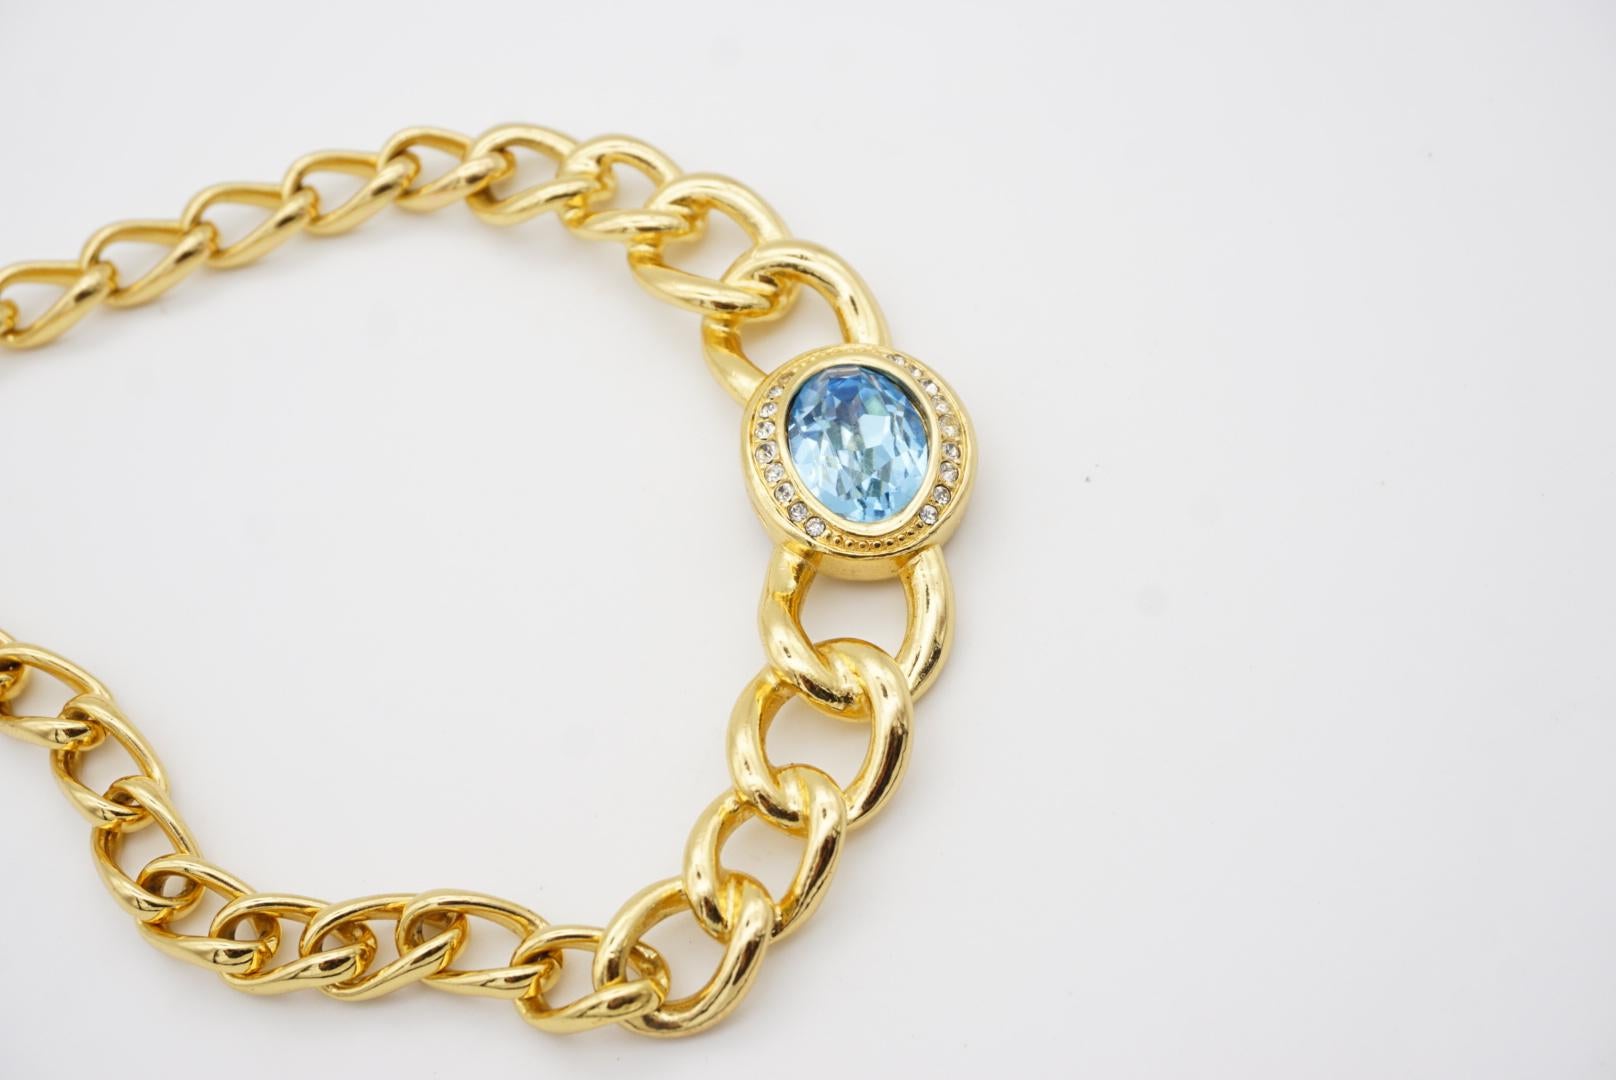 Christian Dior Vintage 1990s Aqua Blue Oval Crystal Chunky Gold Choker Necklace  For Sale 2